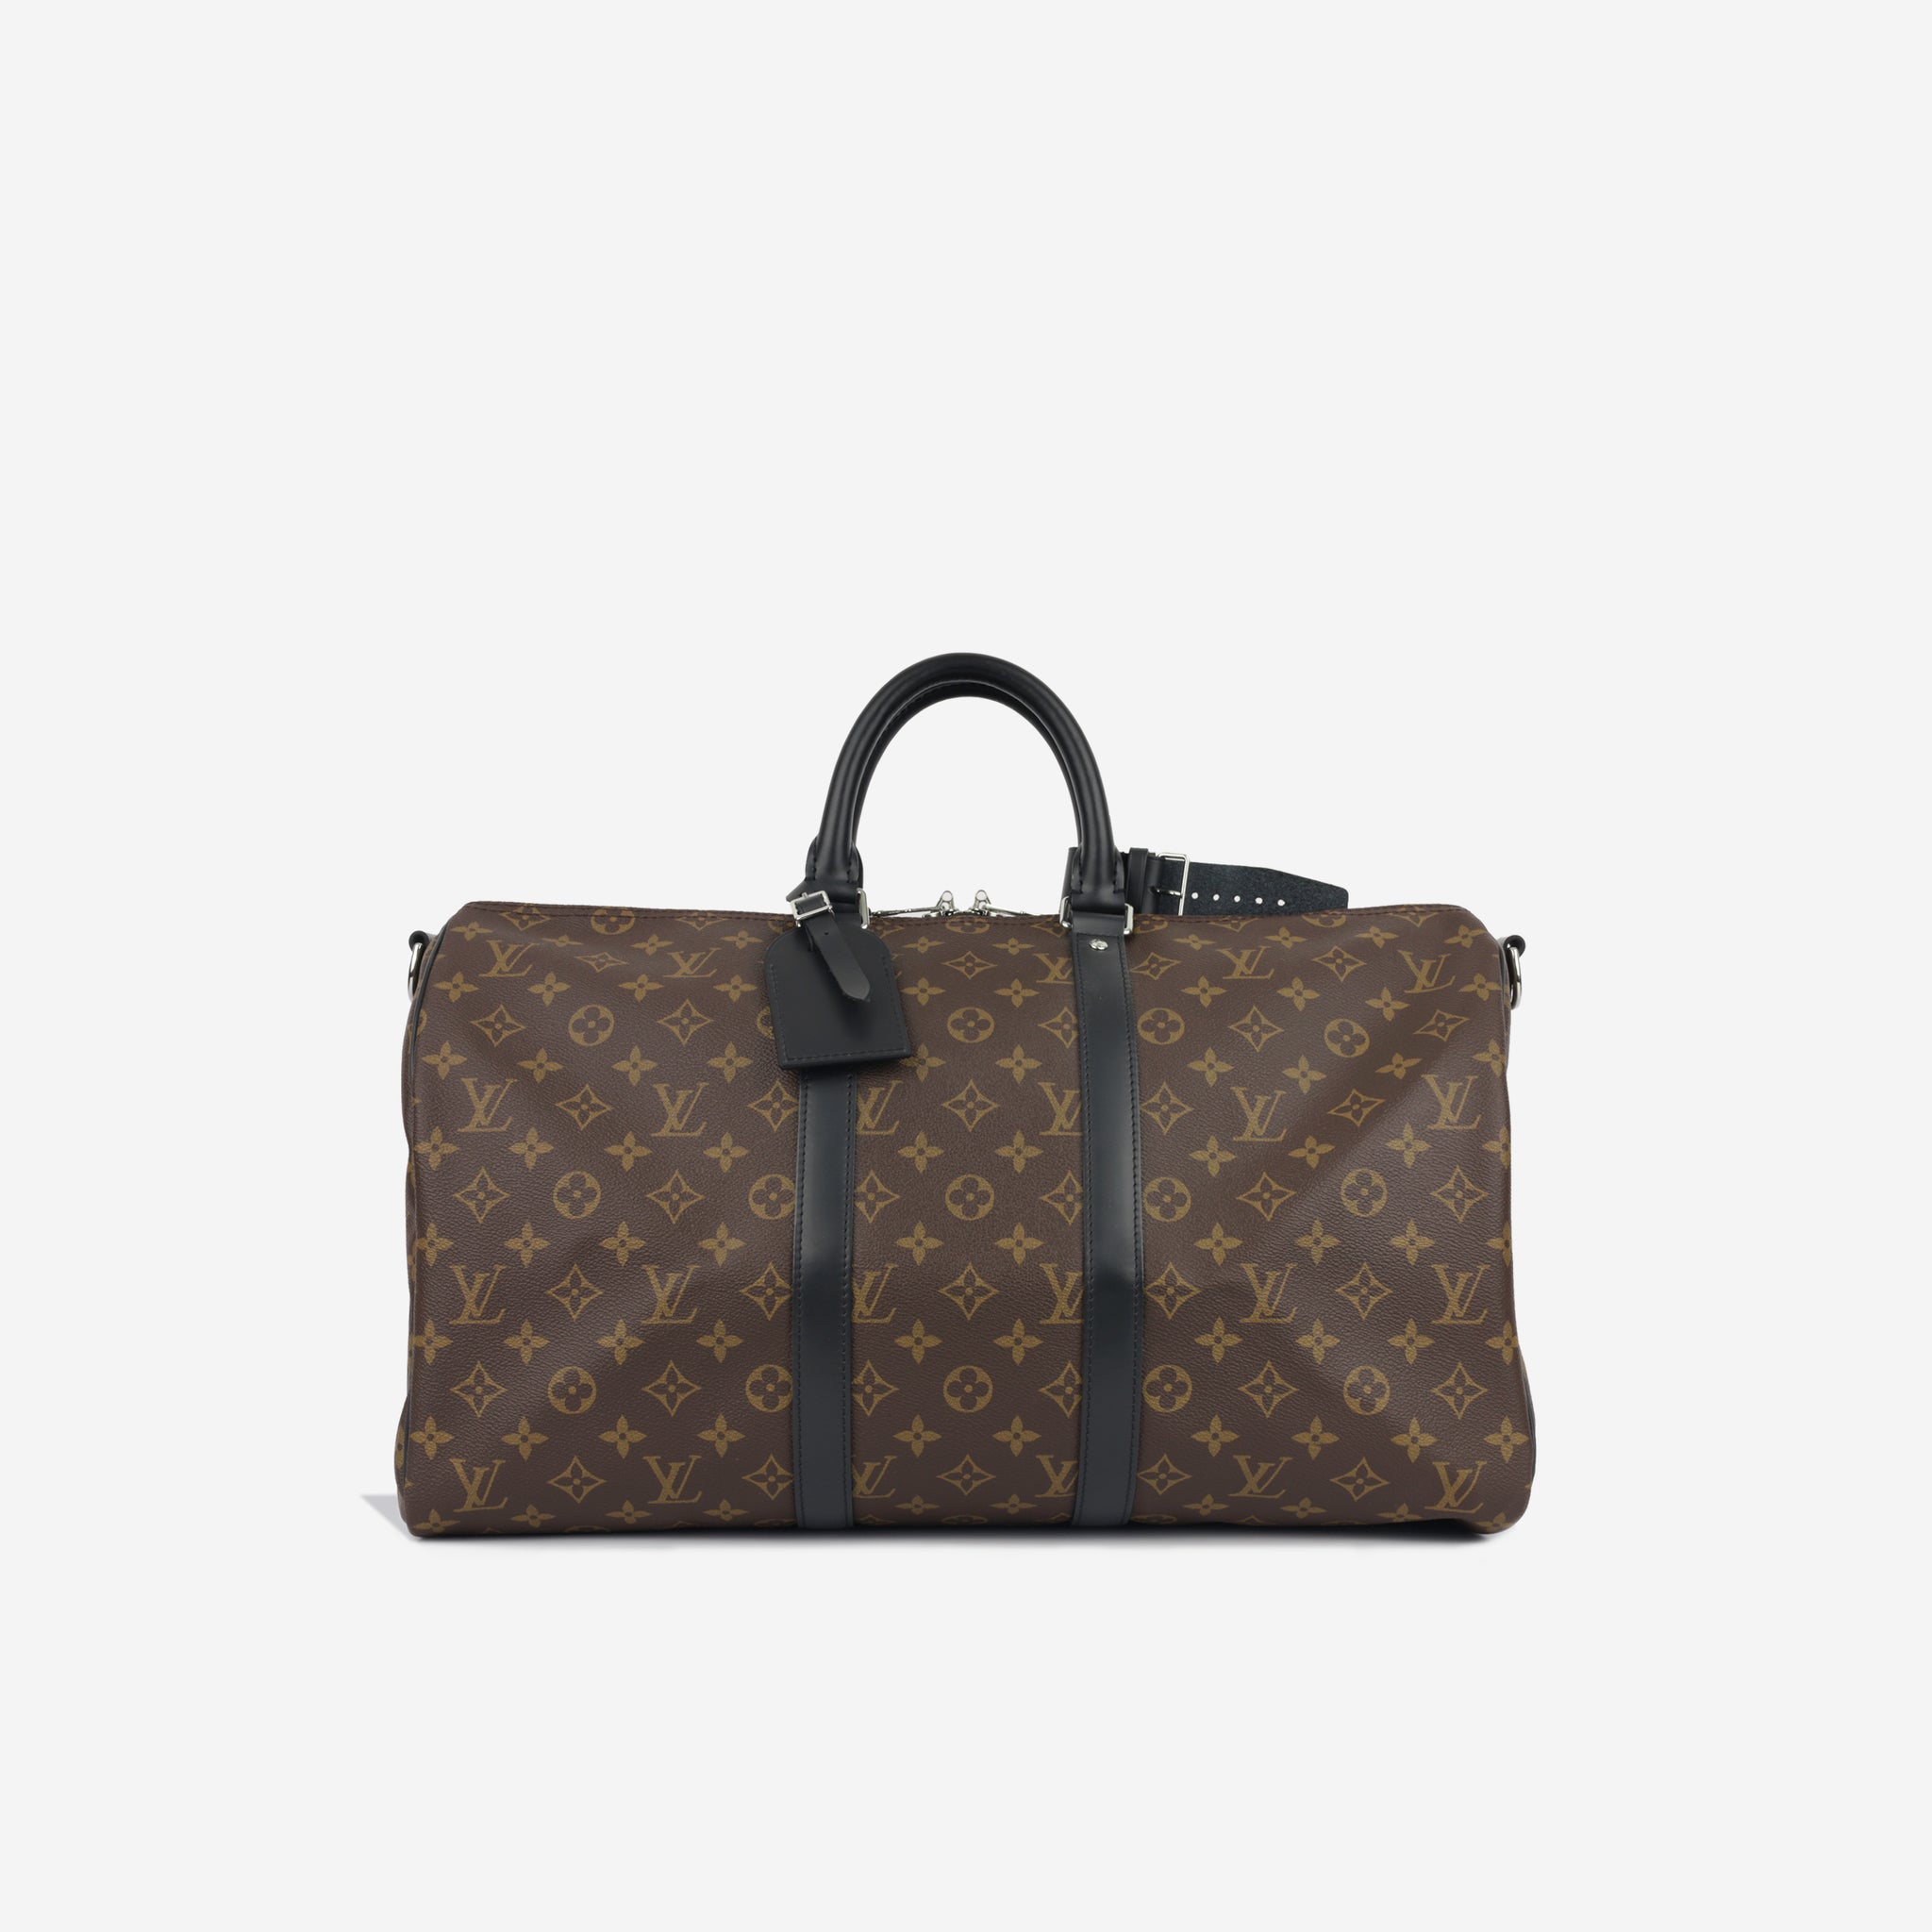 Keepall Bandouliere 45 - TRAVEL